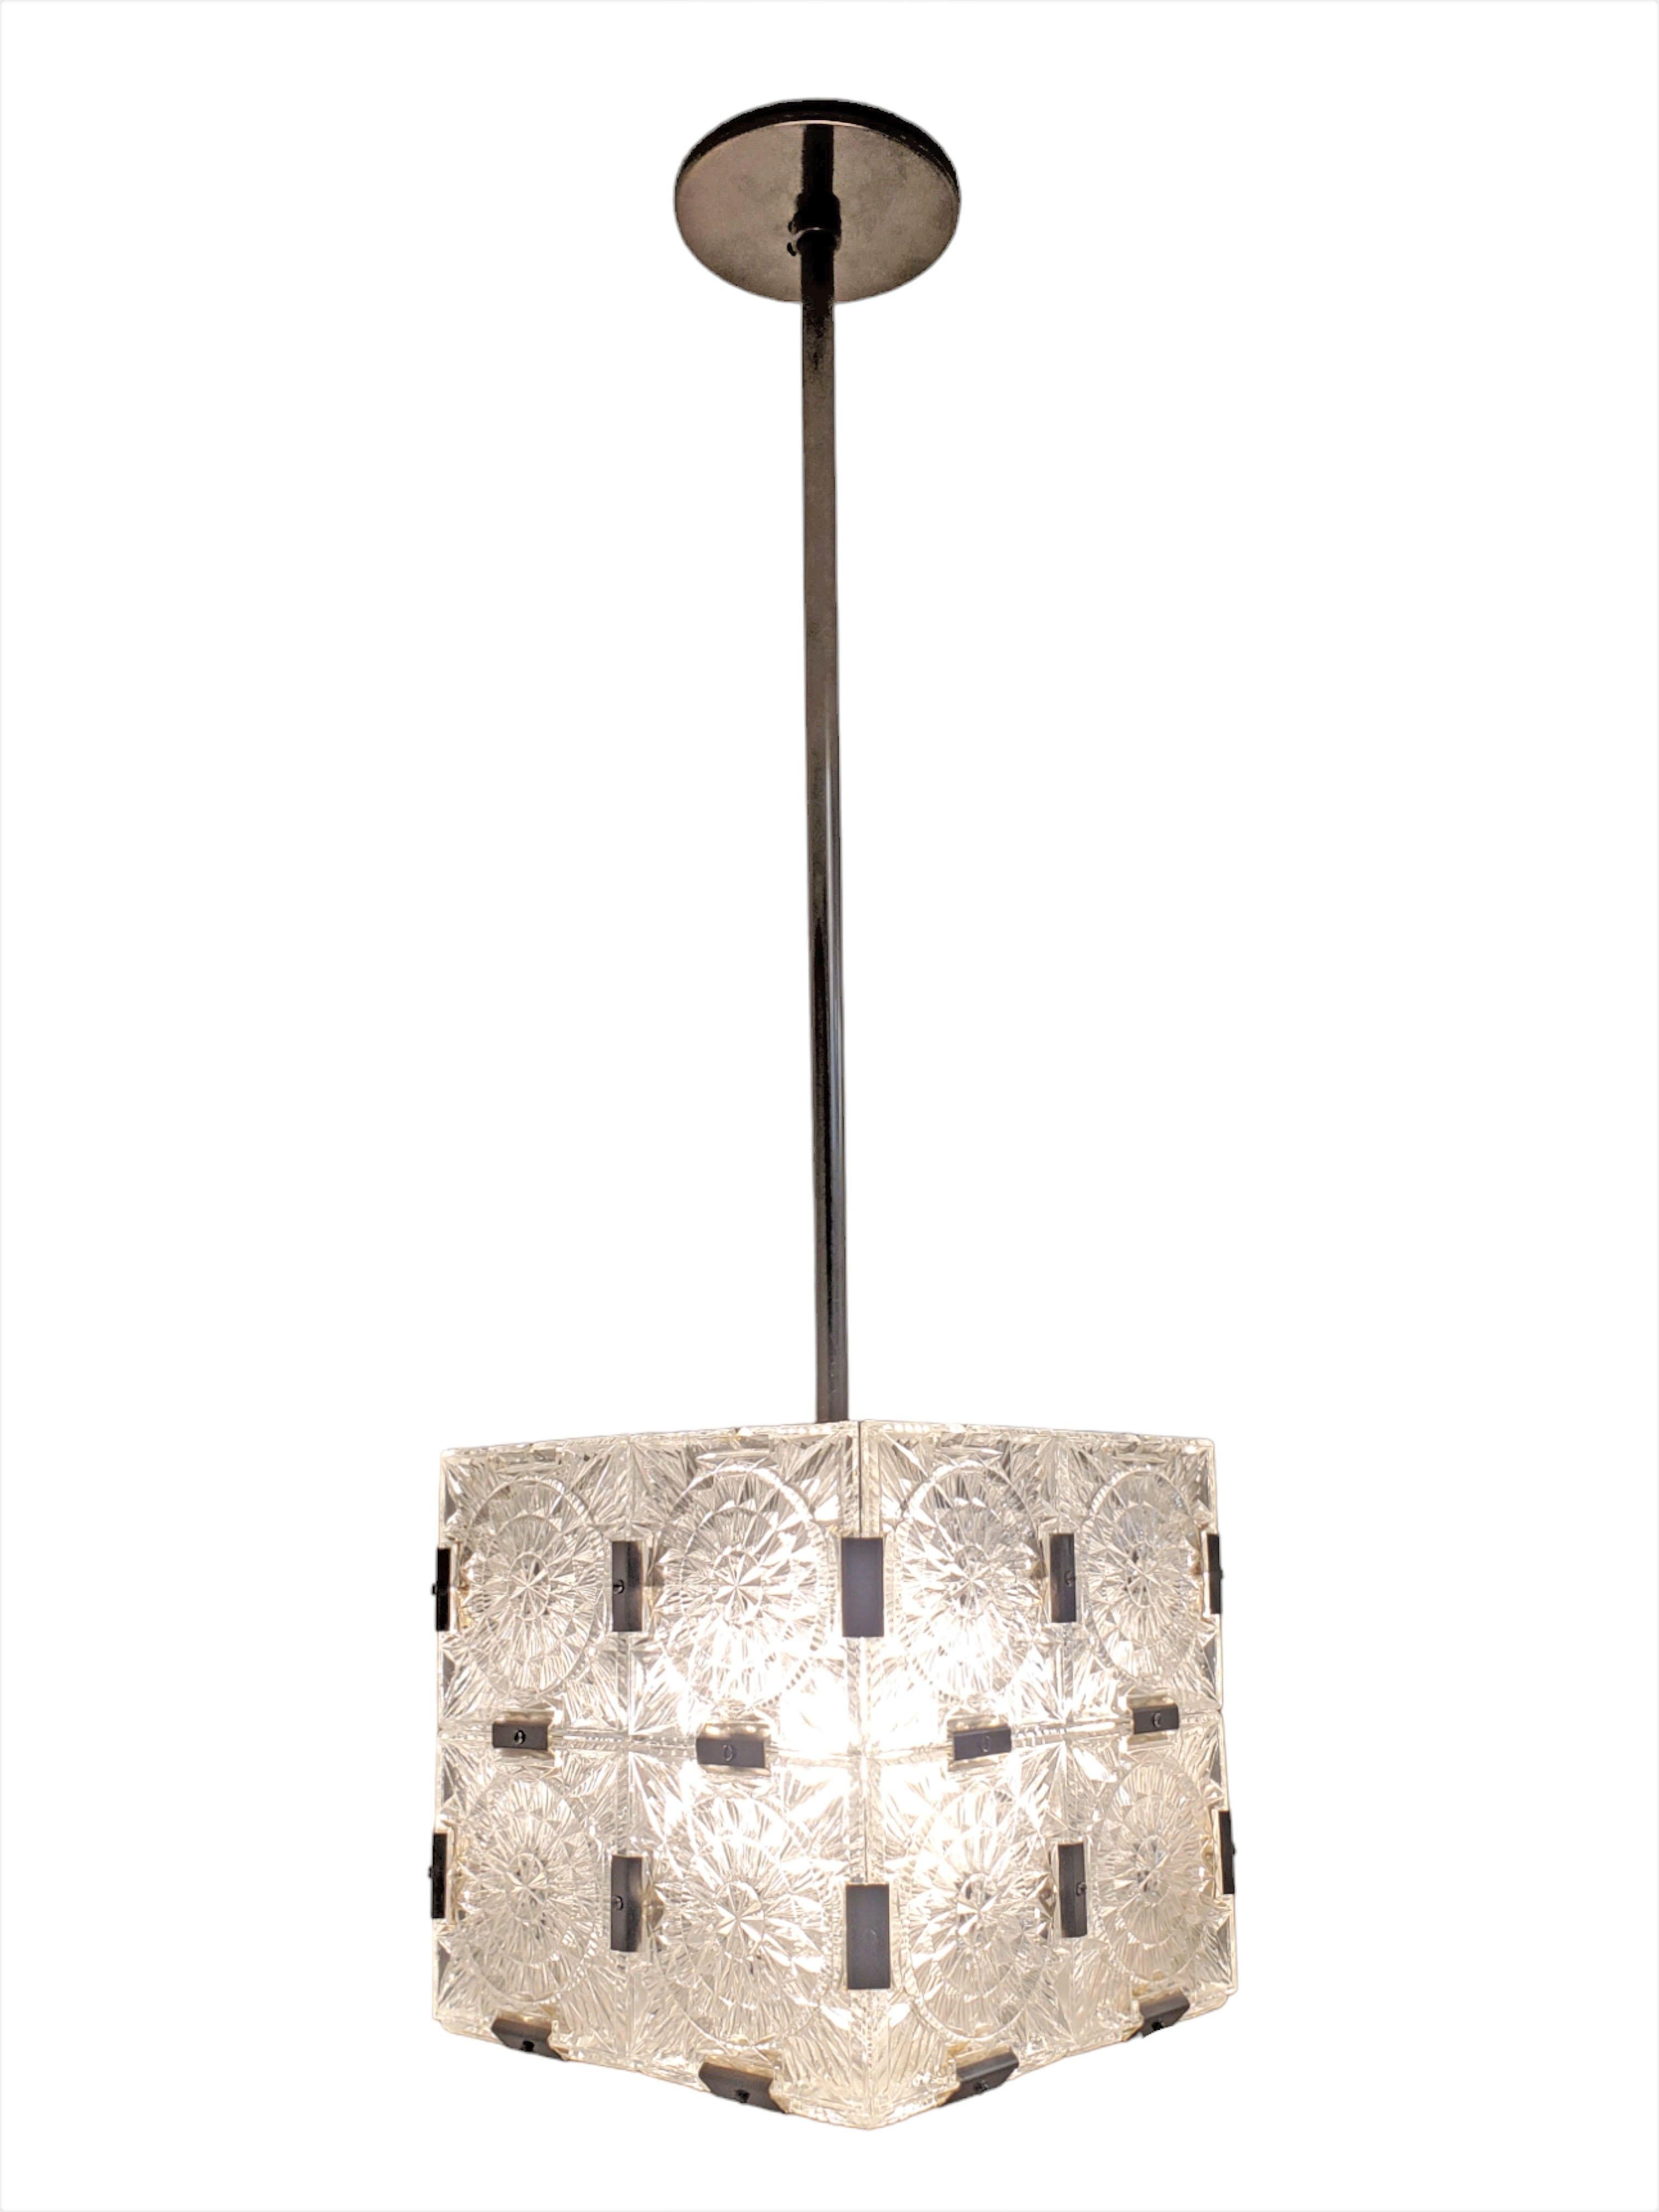 European Set of Ten Original Box Cube Pendant Lights, Glass with Nickeled Clips For Sale